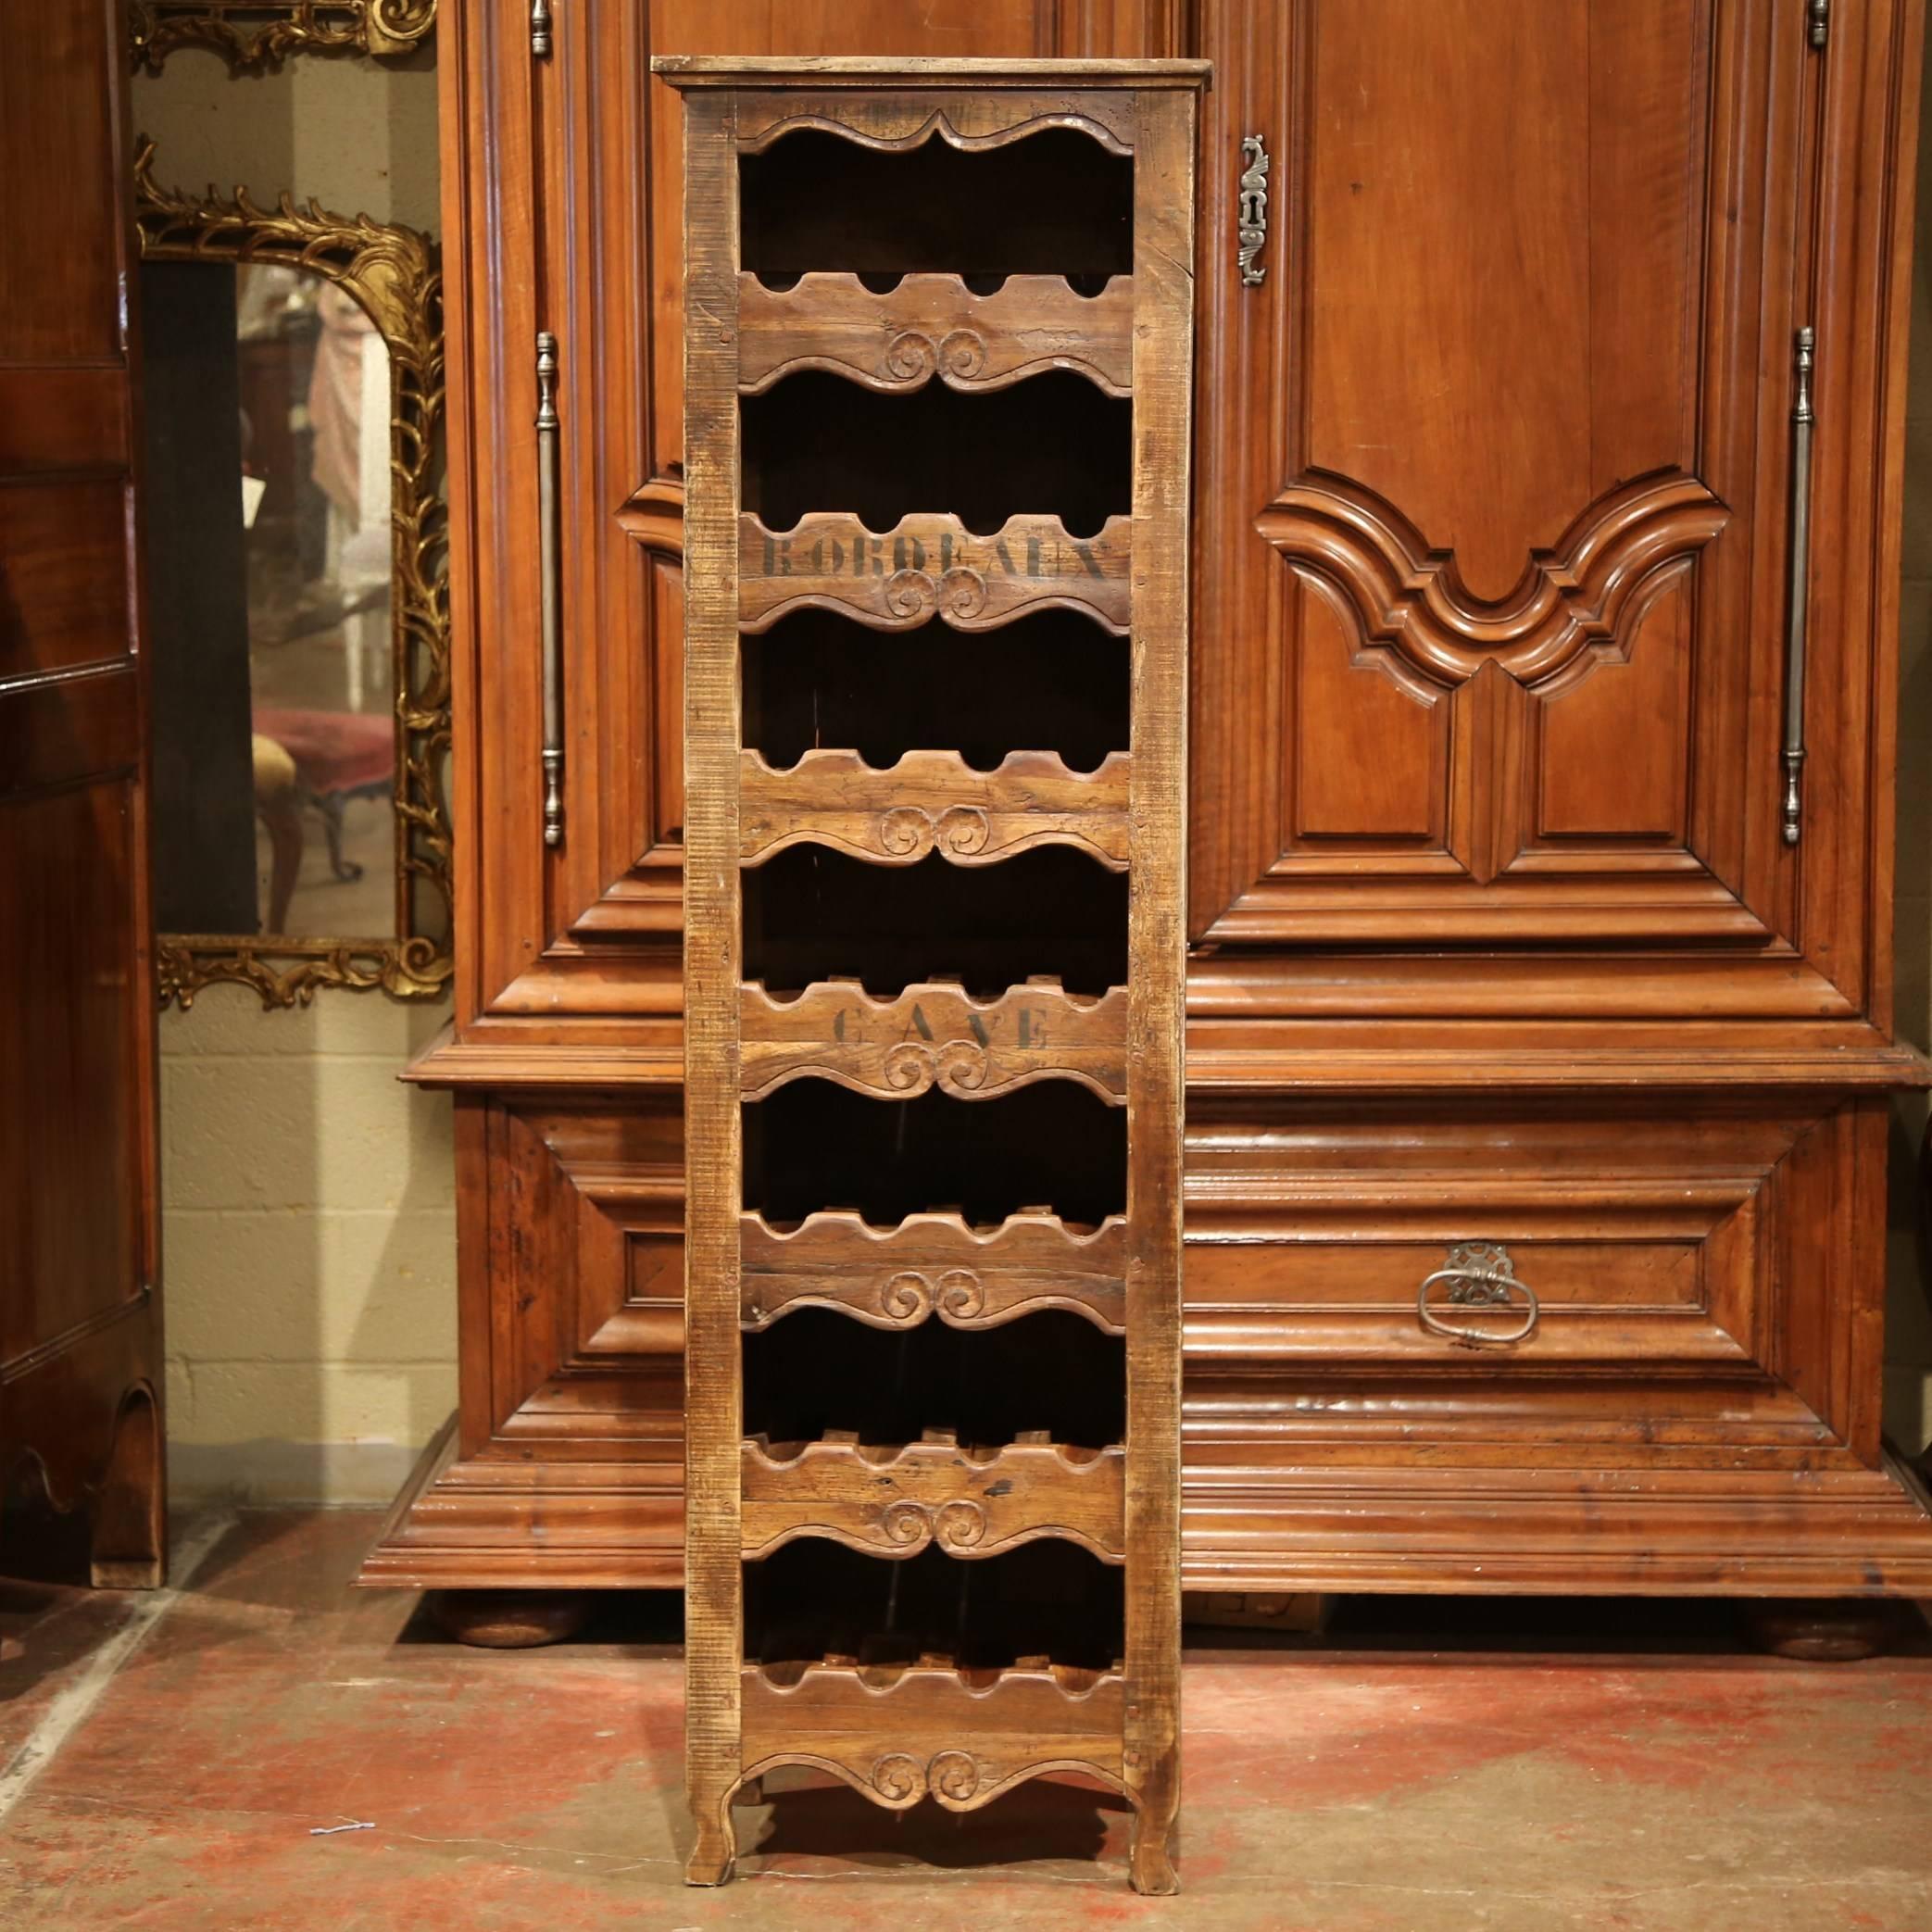 This elegant, antique wine storage cabinet was crafted in France using old timber. The tall and thin wine rack has four small curved feet and apron, and seven shelves. Each row will hold up to four bottles, so 28 bottles total. The cabinet has the